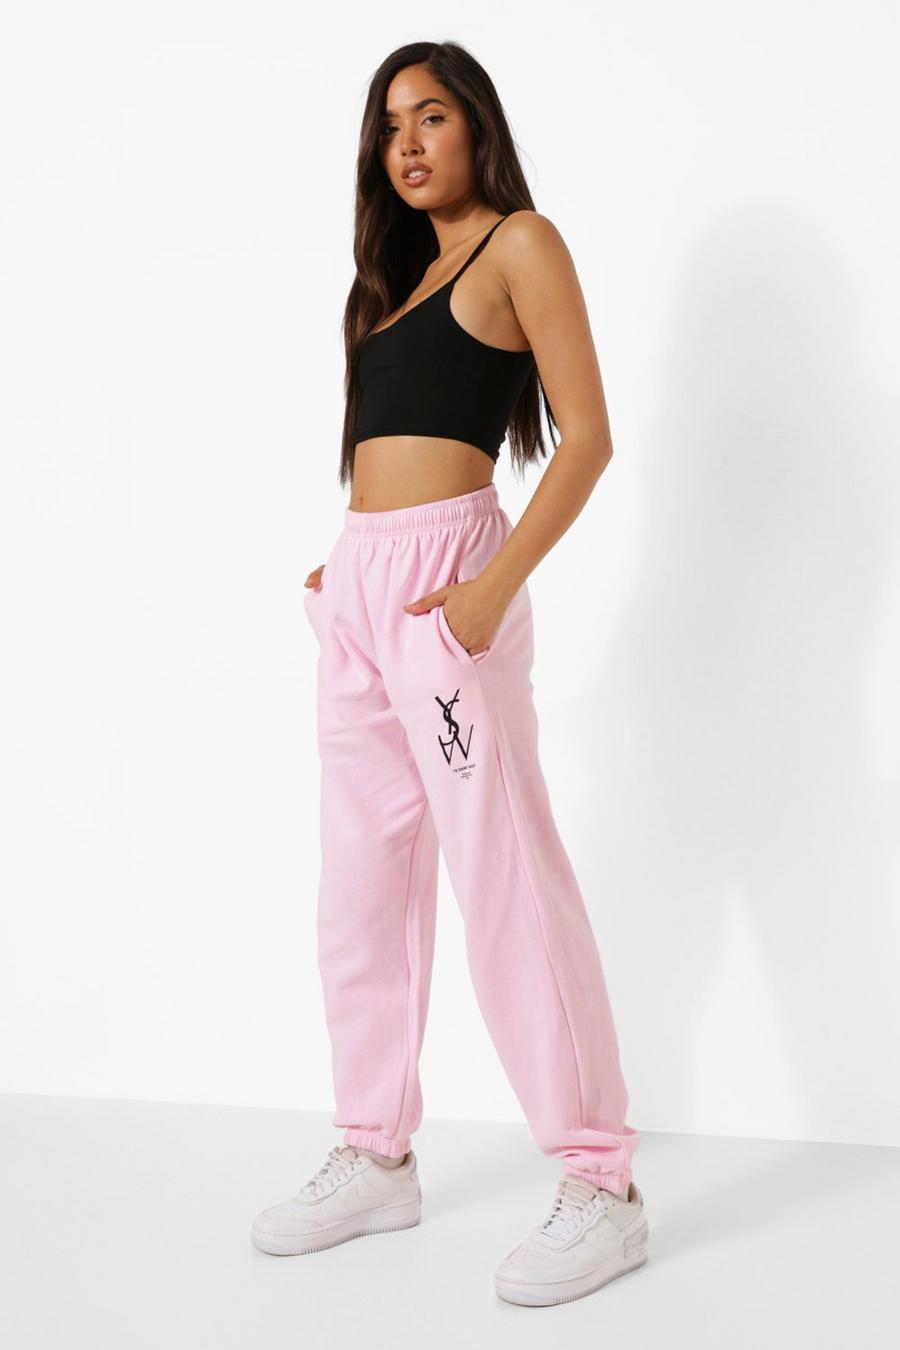 Light pink Oversized Ysw Print Track Pants image number 1